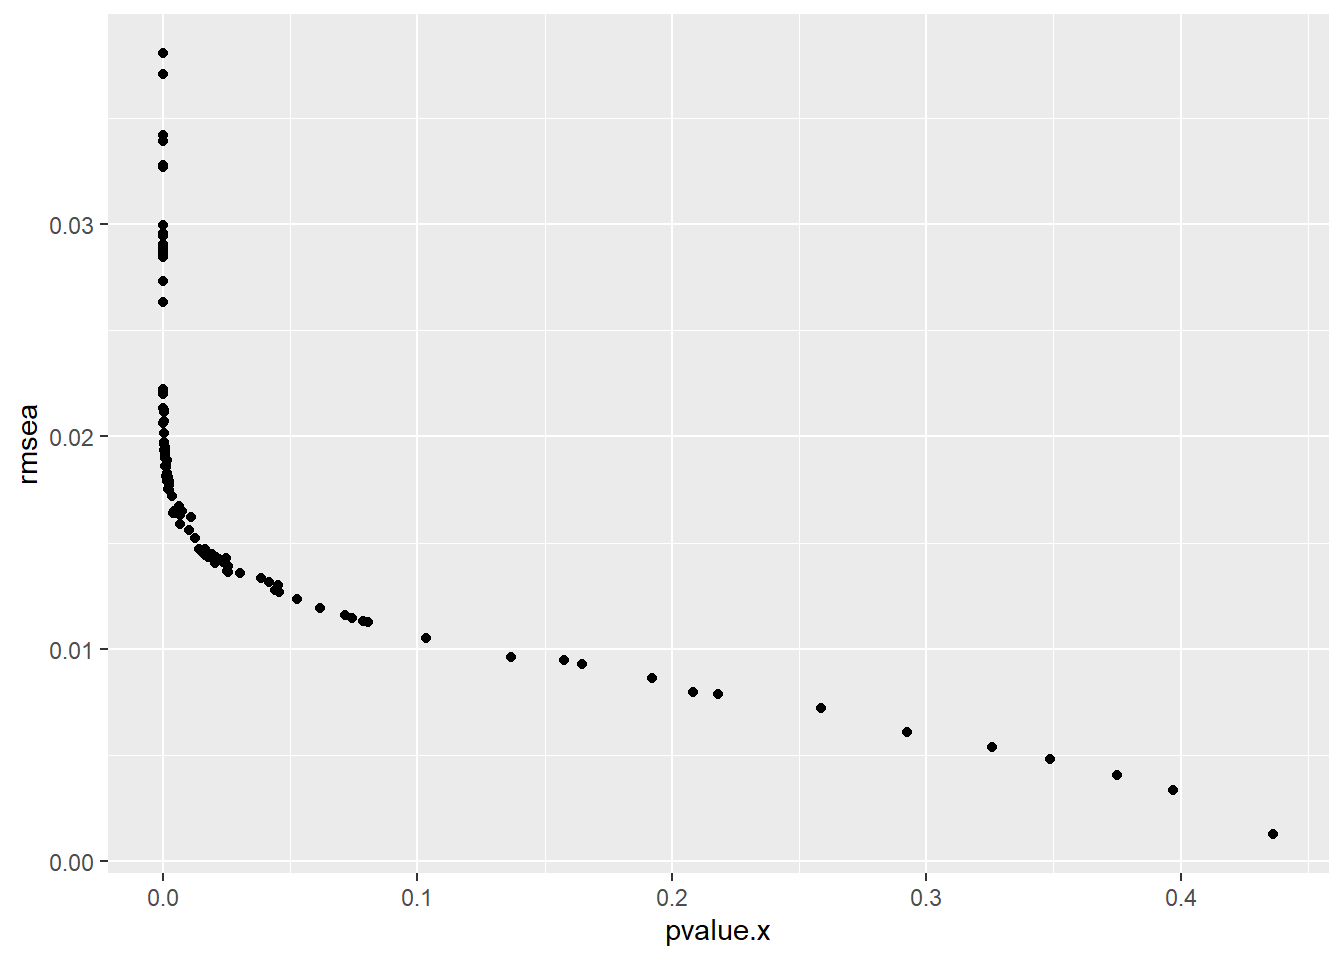 The figure shows that there is a tradeoff between the pvalue and the Root Mean Square Error of the model